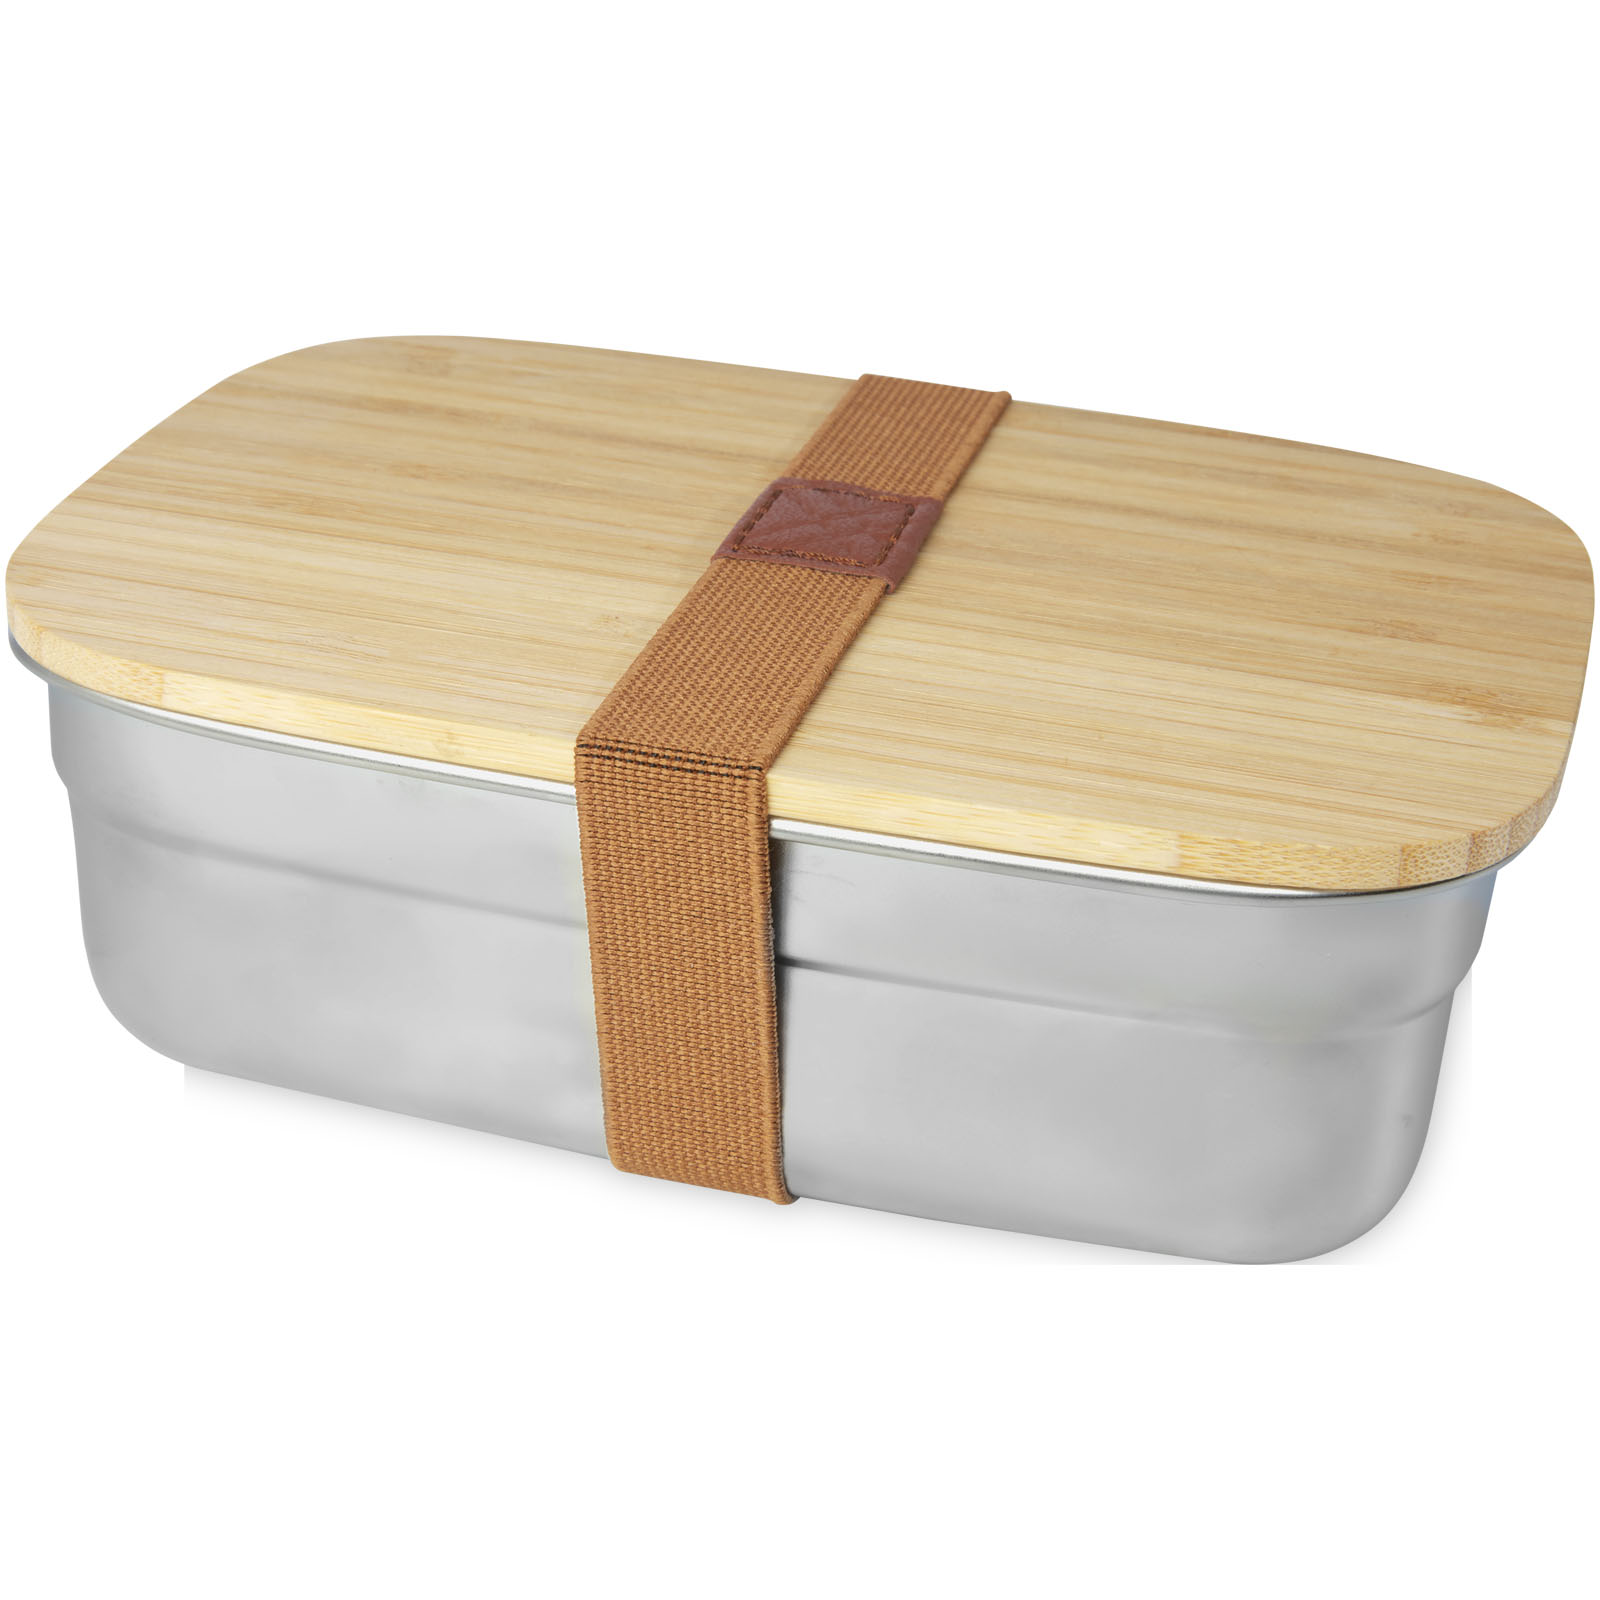 Advertising Lunch Boxes - Tite stainless steel lunch box with bamboo lid